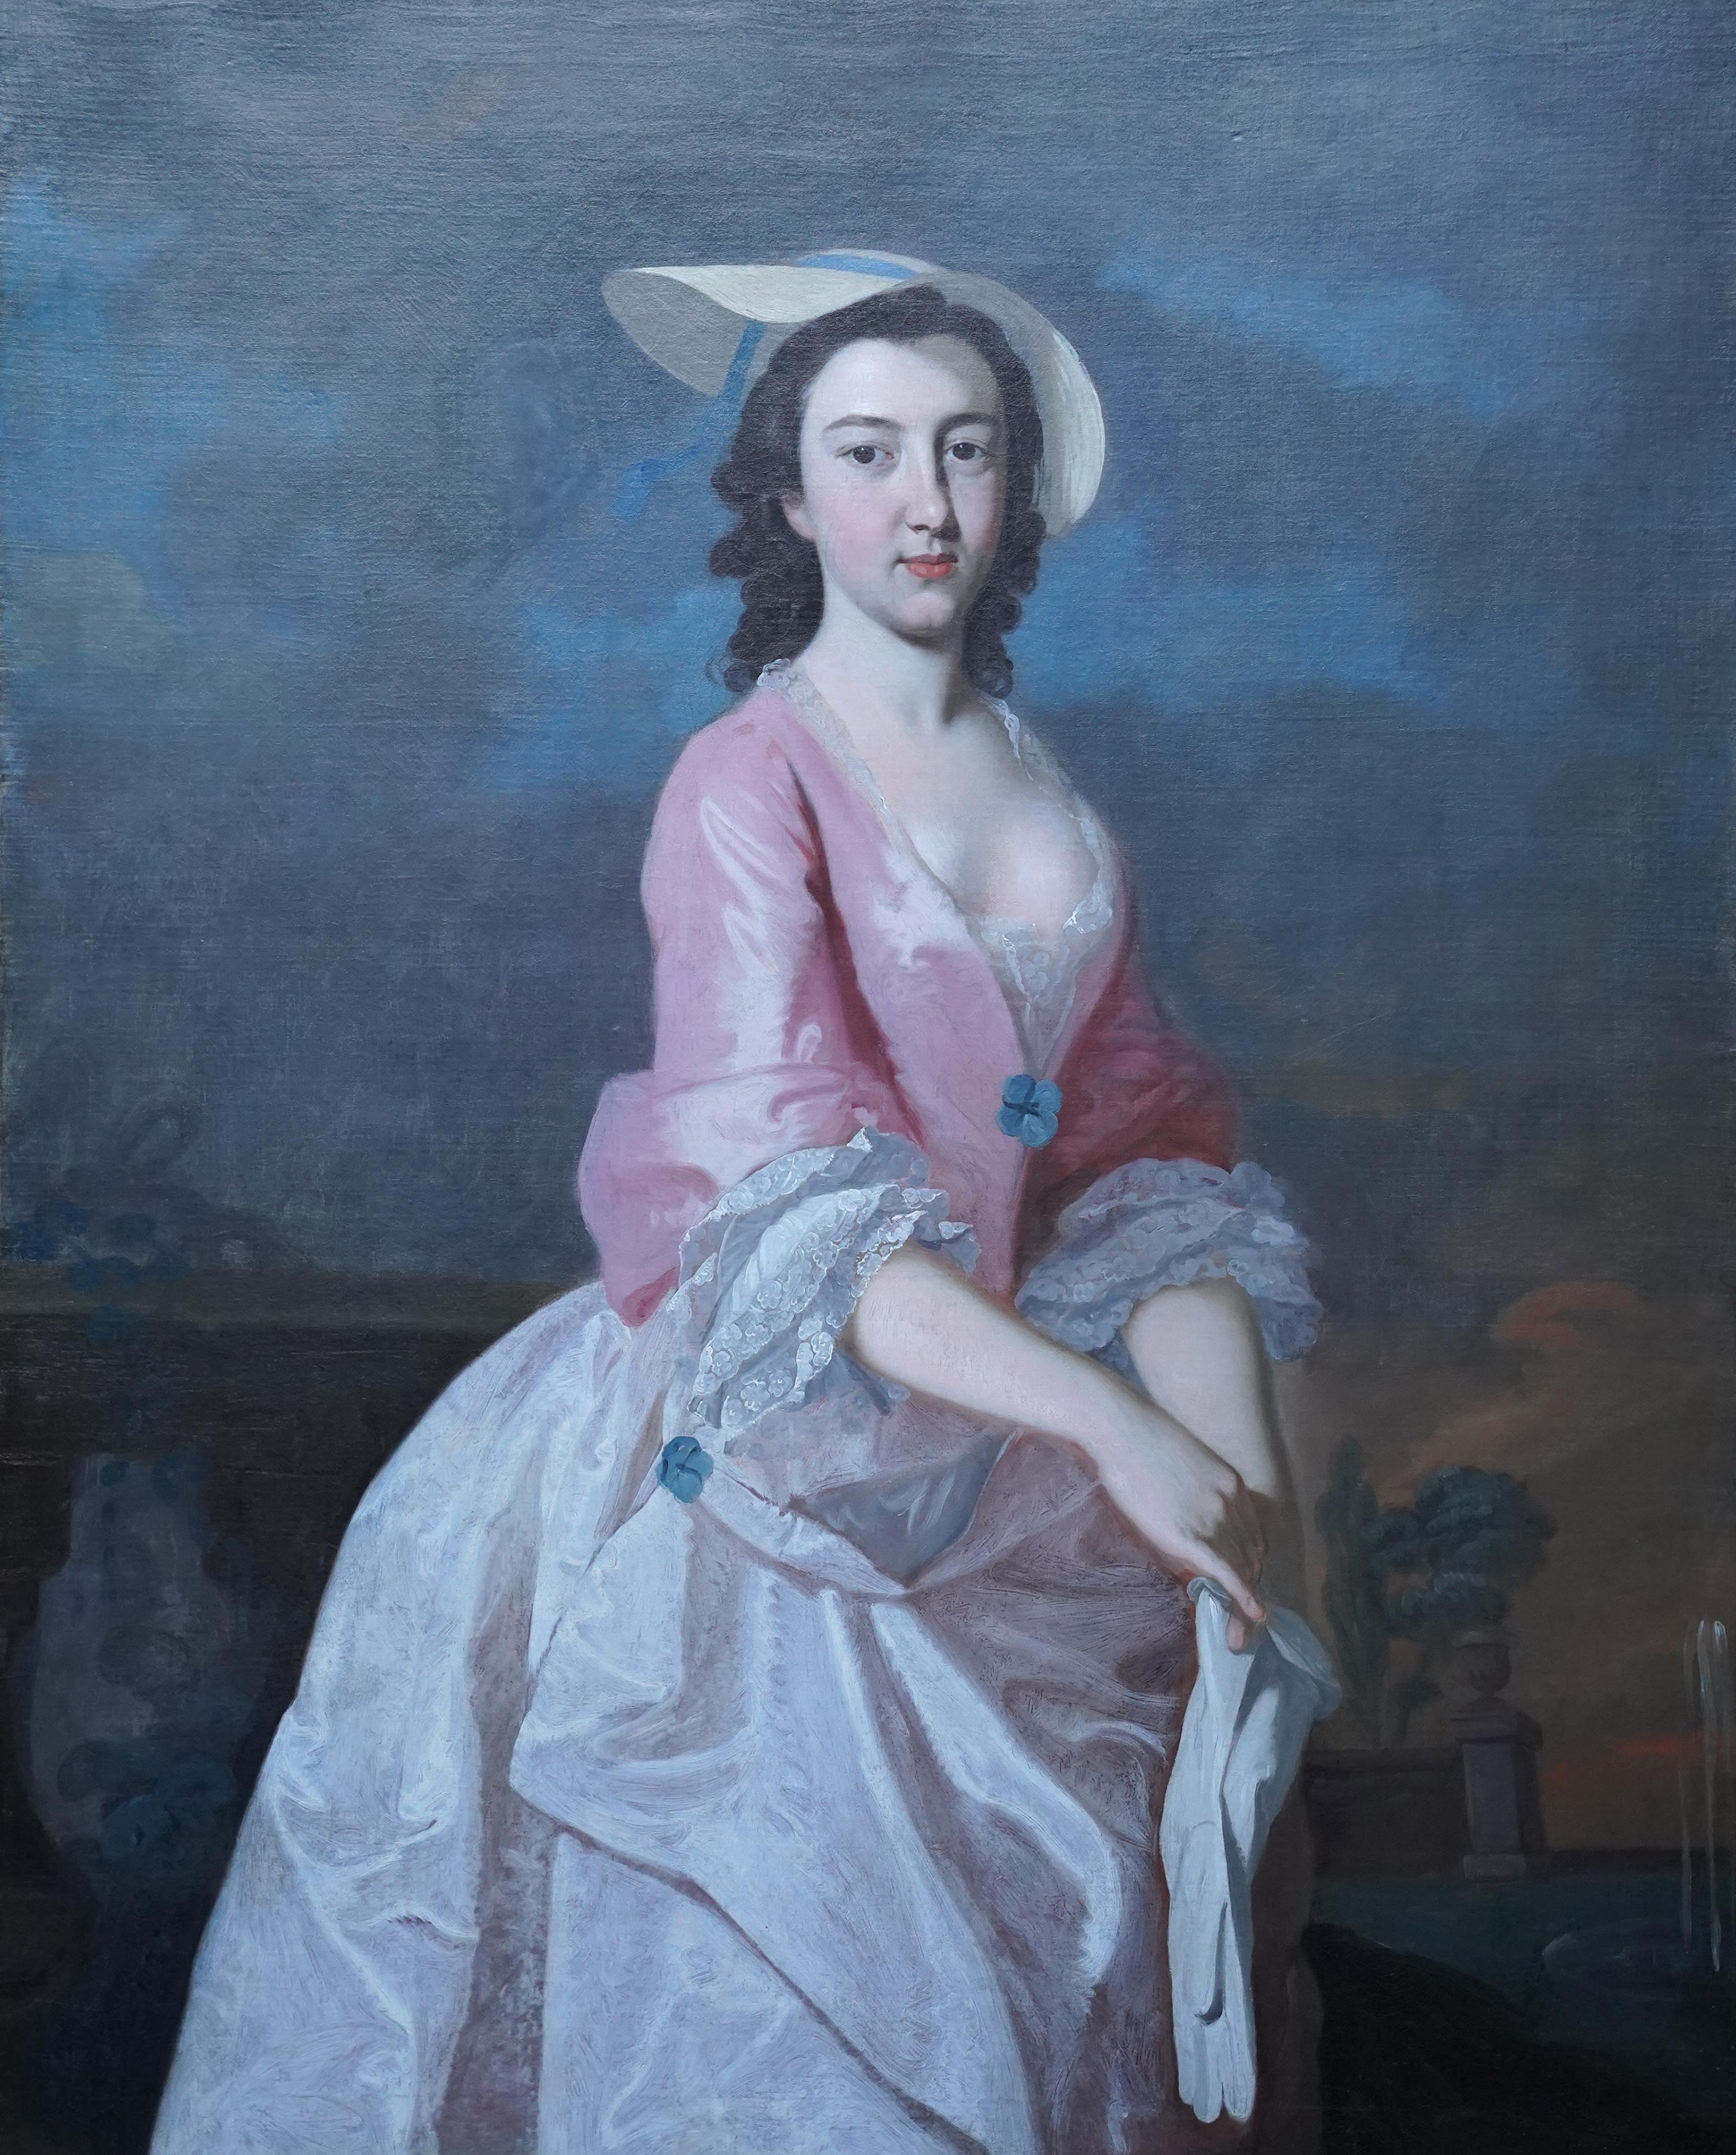 Portrait of a Lady with White Gloves - British 18thC art Old Master oil painting - Painting by Thomas Hudson